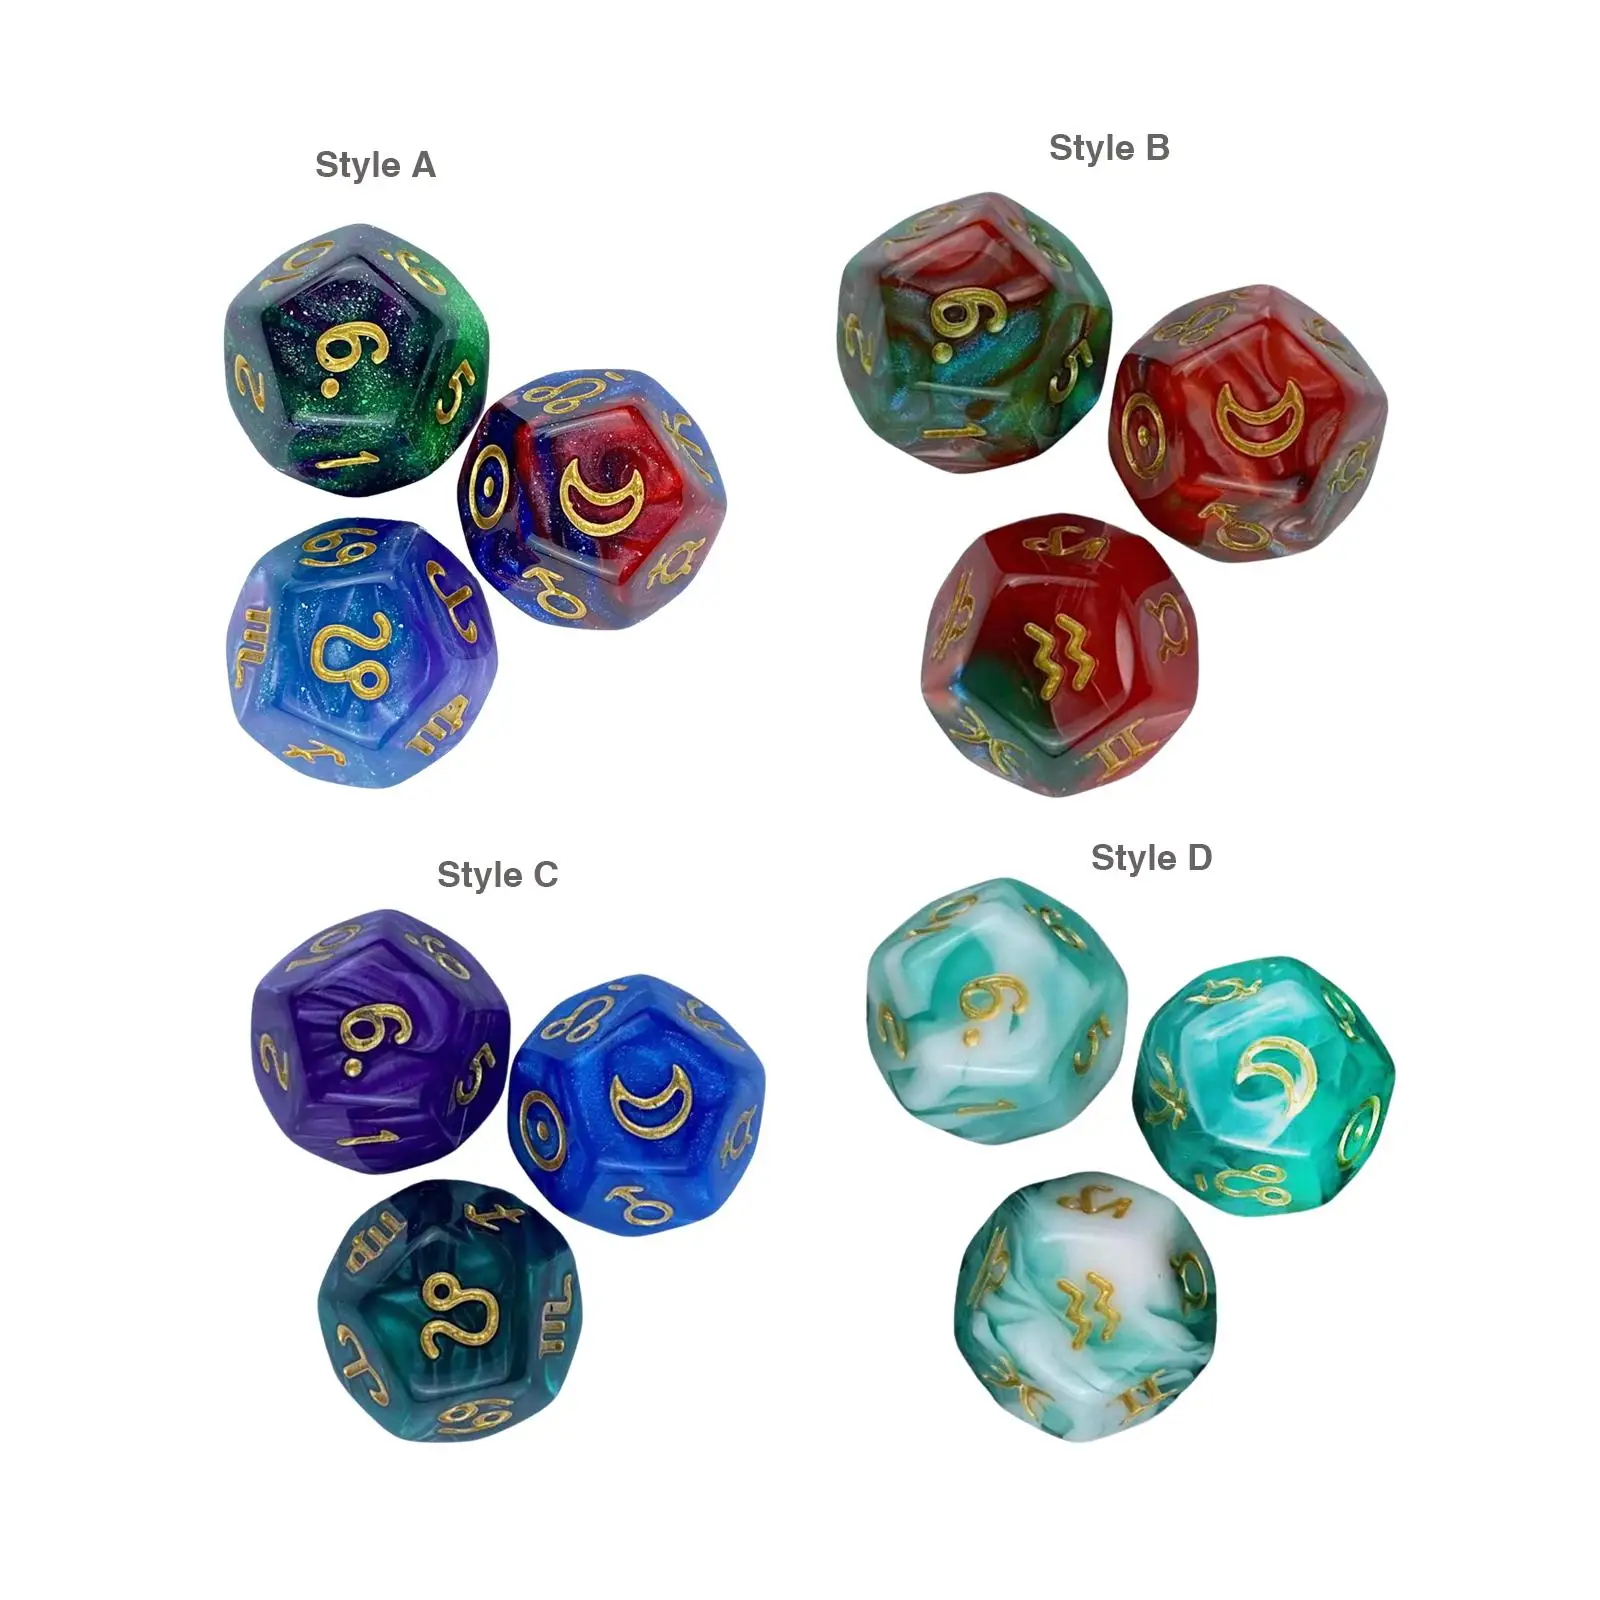 3 Pieces Astrology Dice Dice Set Collection 12 Sided Constellation Dice for Table Games Role Playing Family Gathering